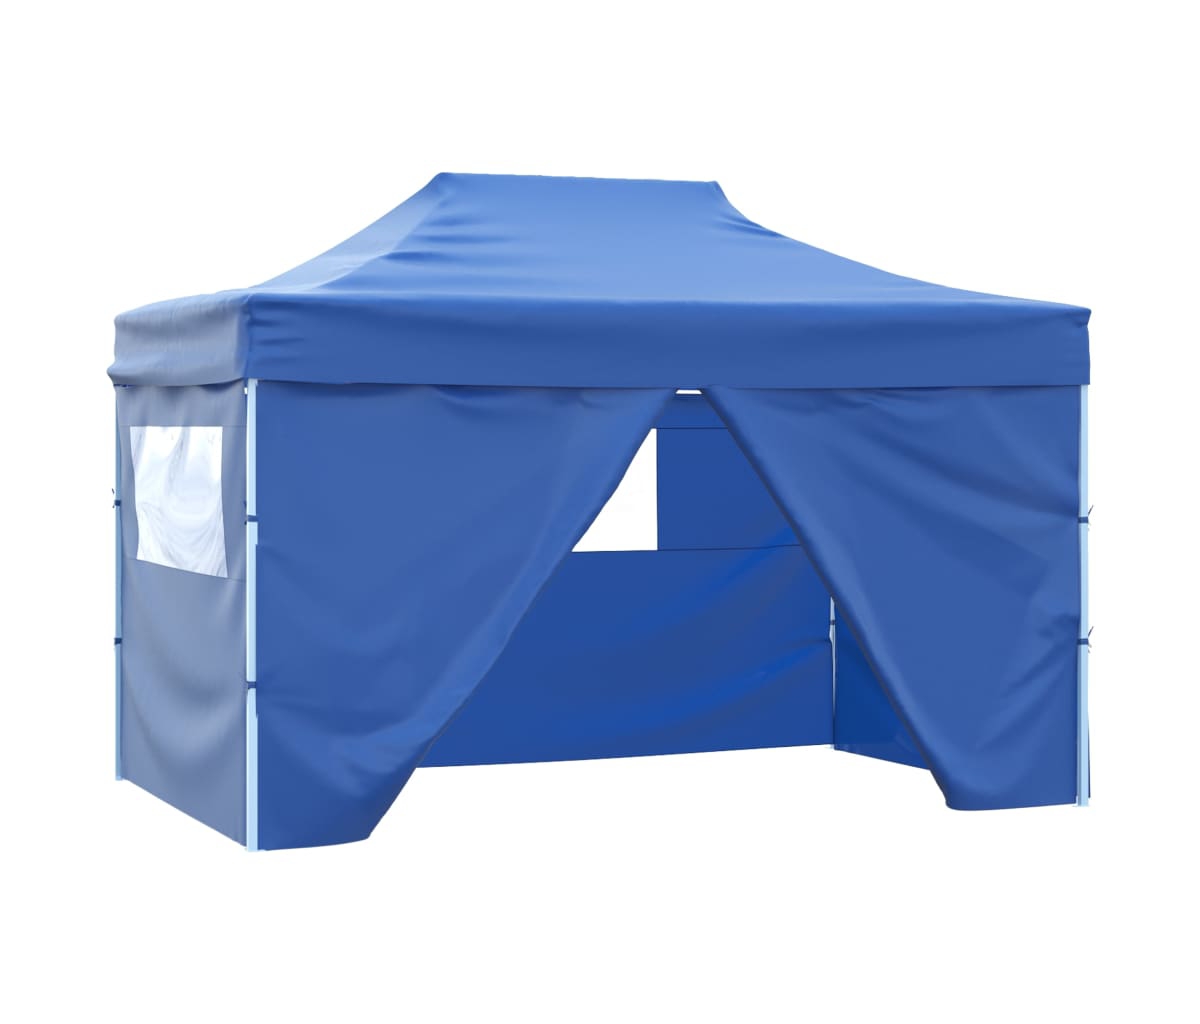 Professional Folding Party Tent with 4 Sidewalls 9.8'x13.1' Steel Blue - Blue